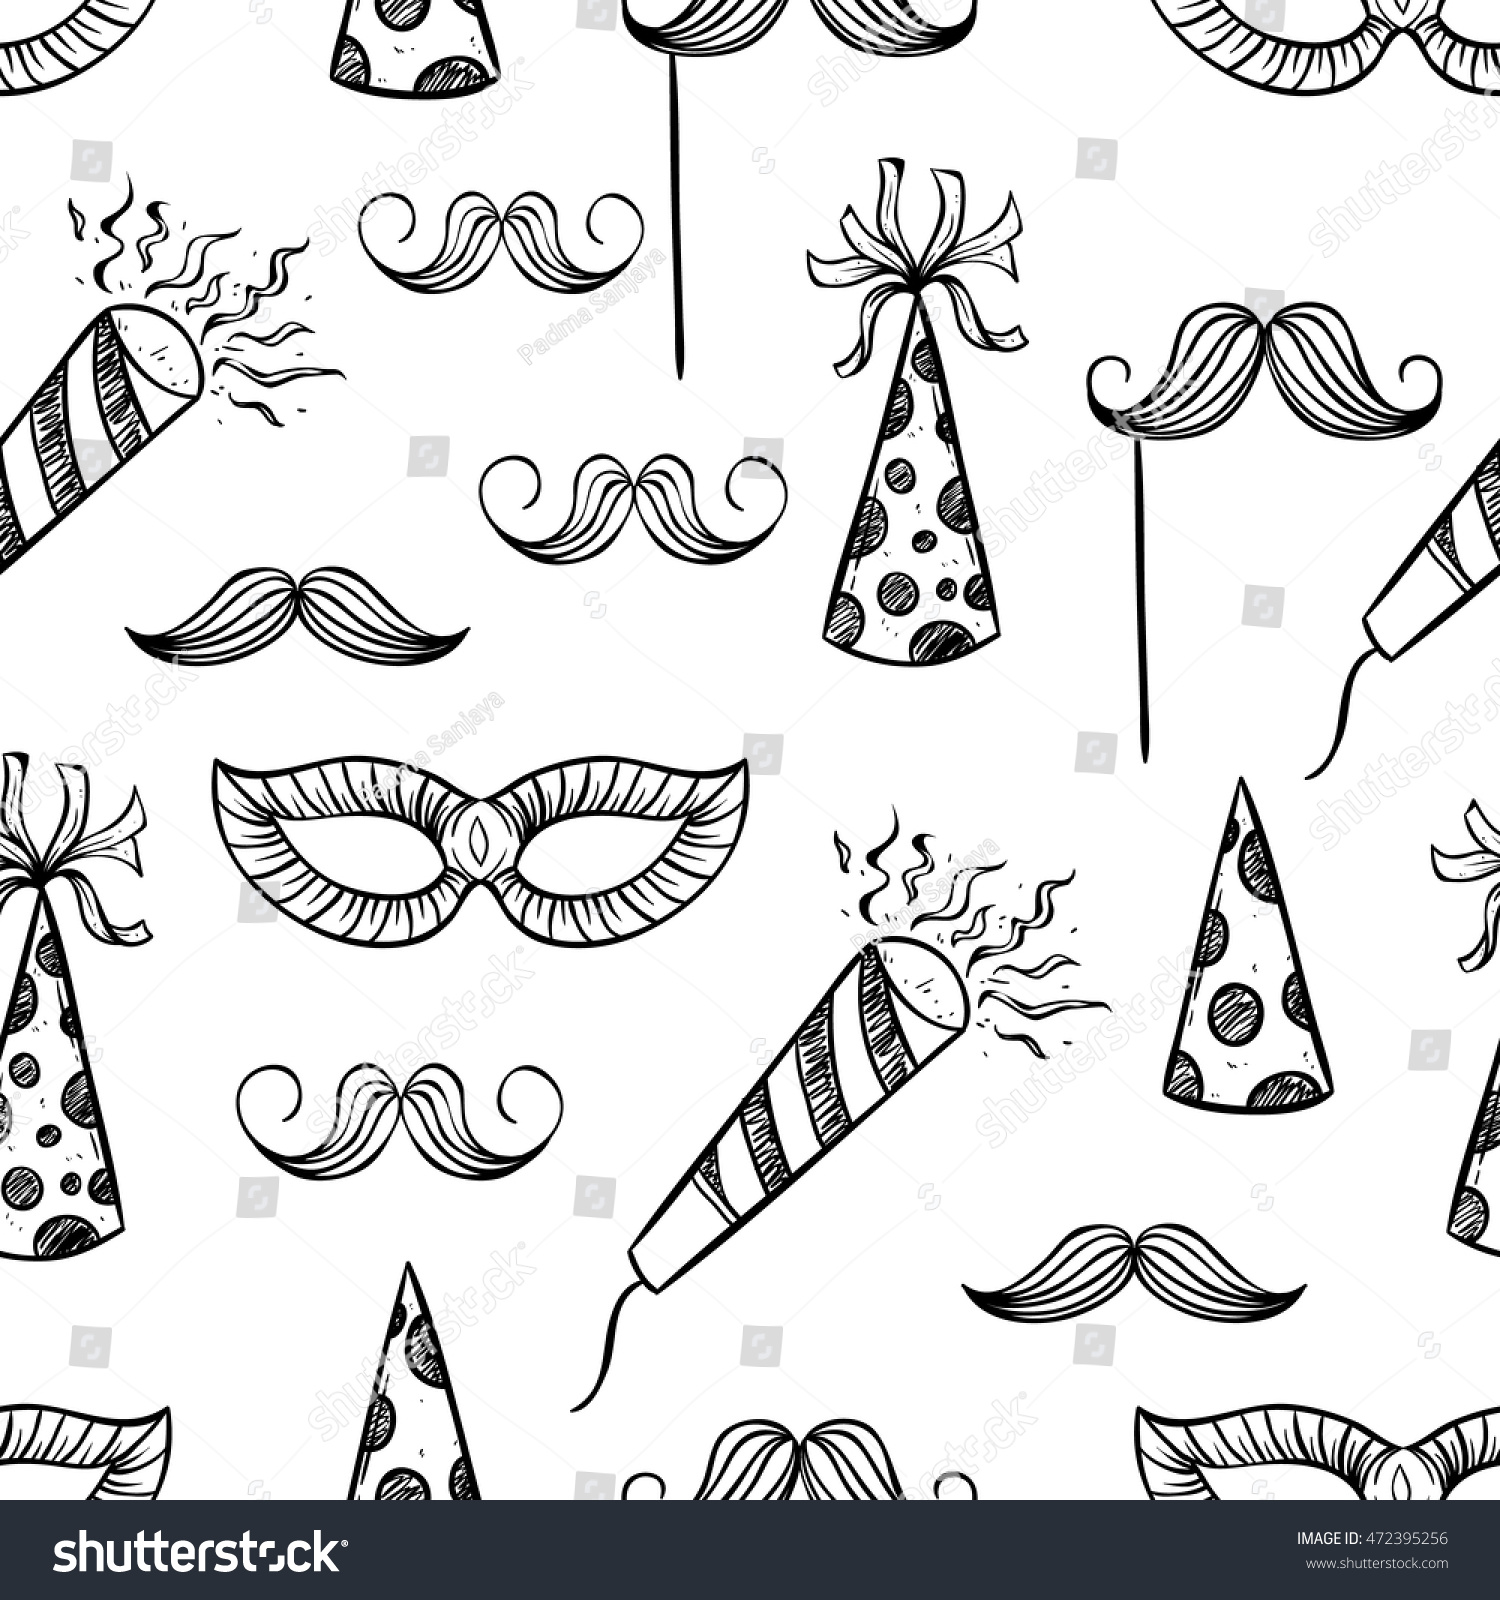 Cute Birthday Seamless Pattern Using Doodle Stock Vector Royalty